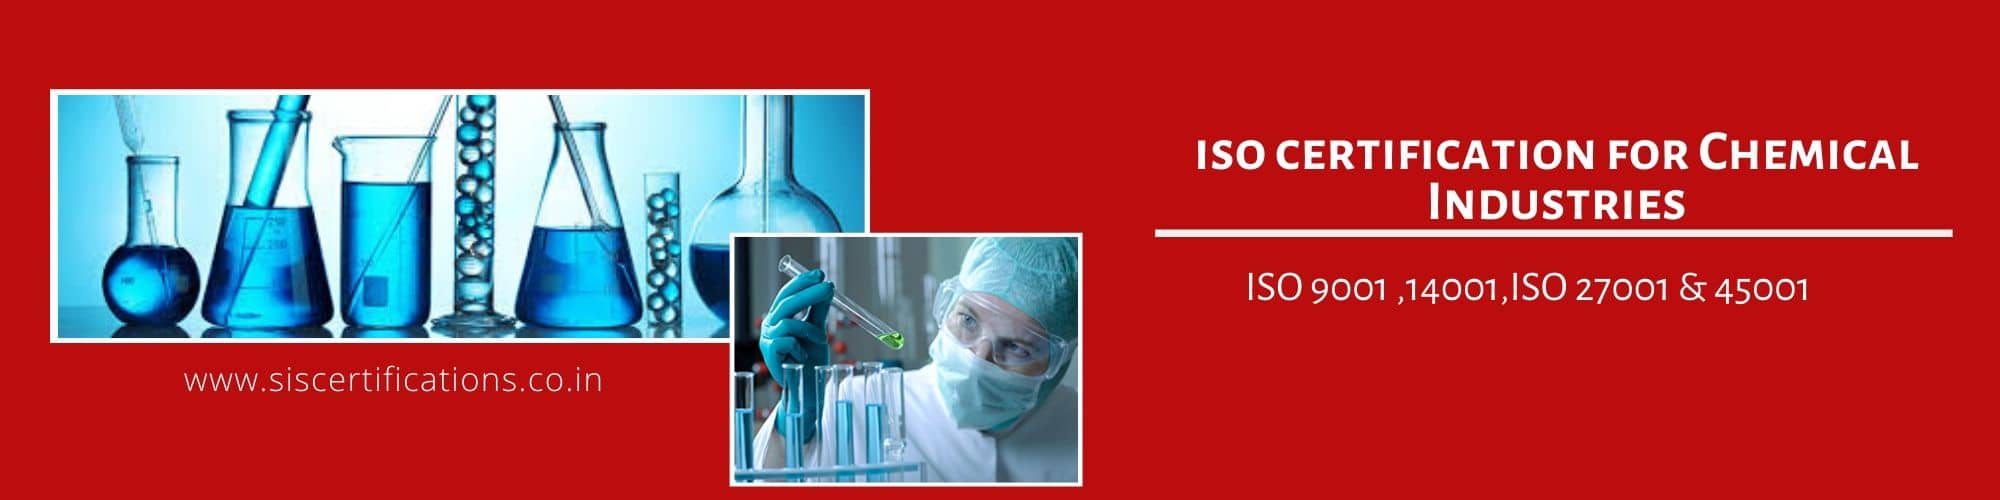 get ISO Certification for Chemical Industries